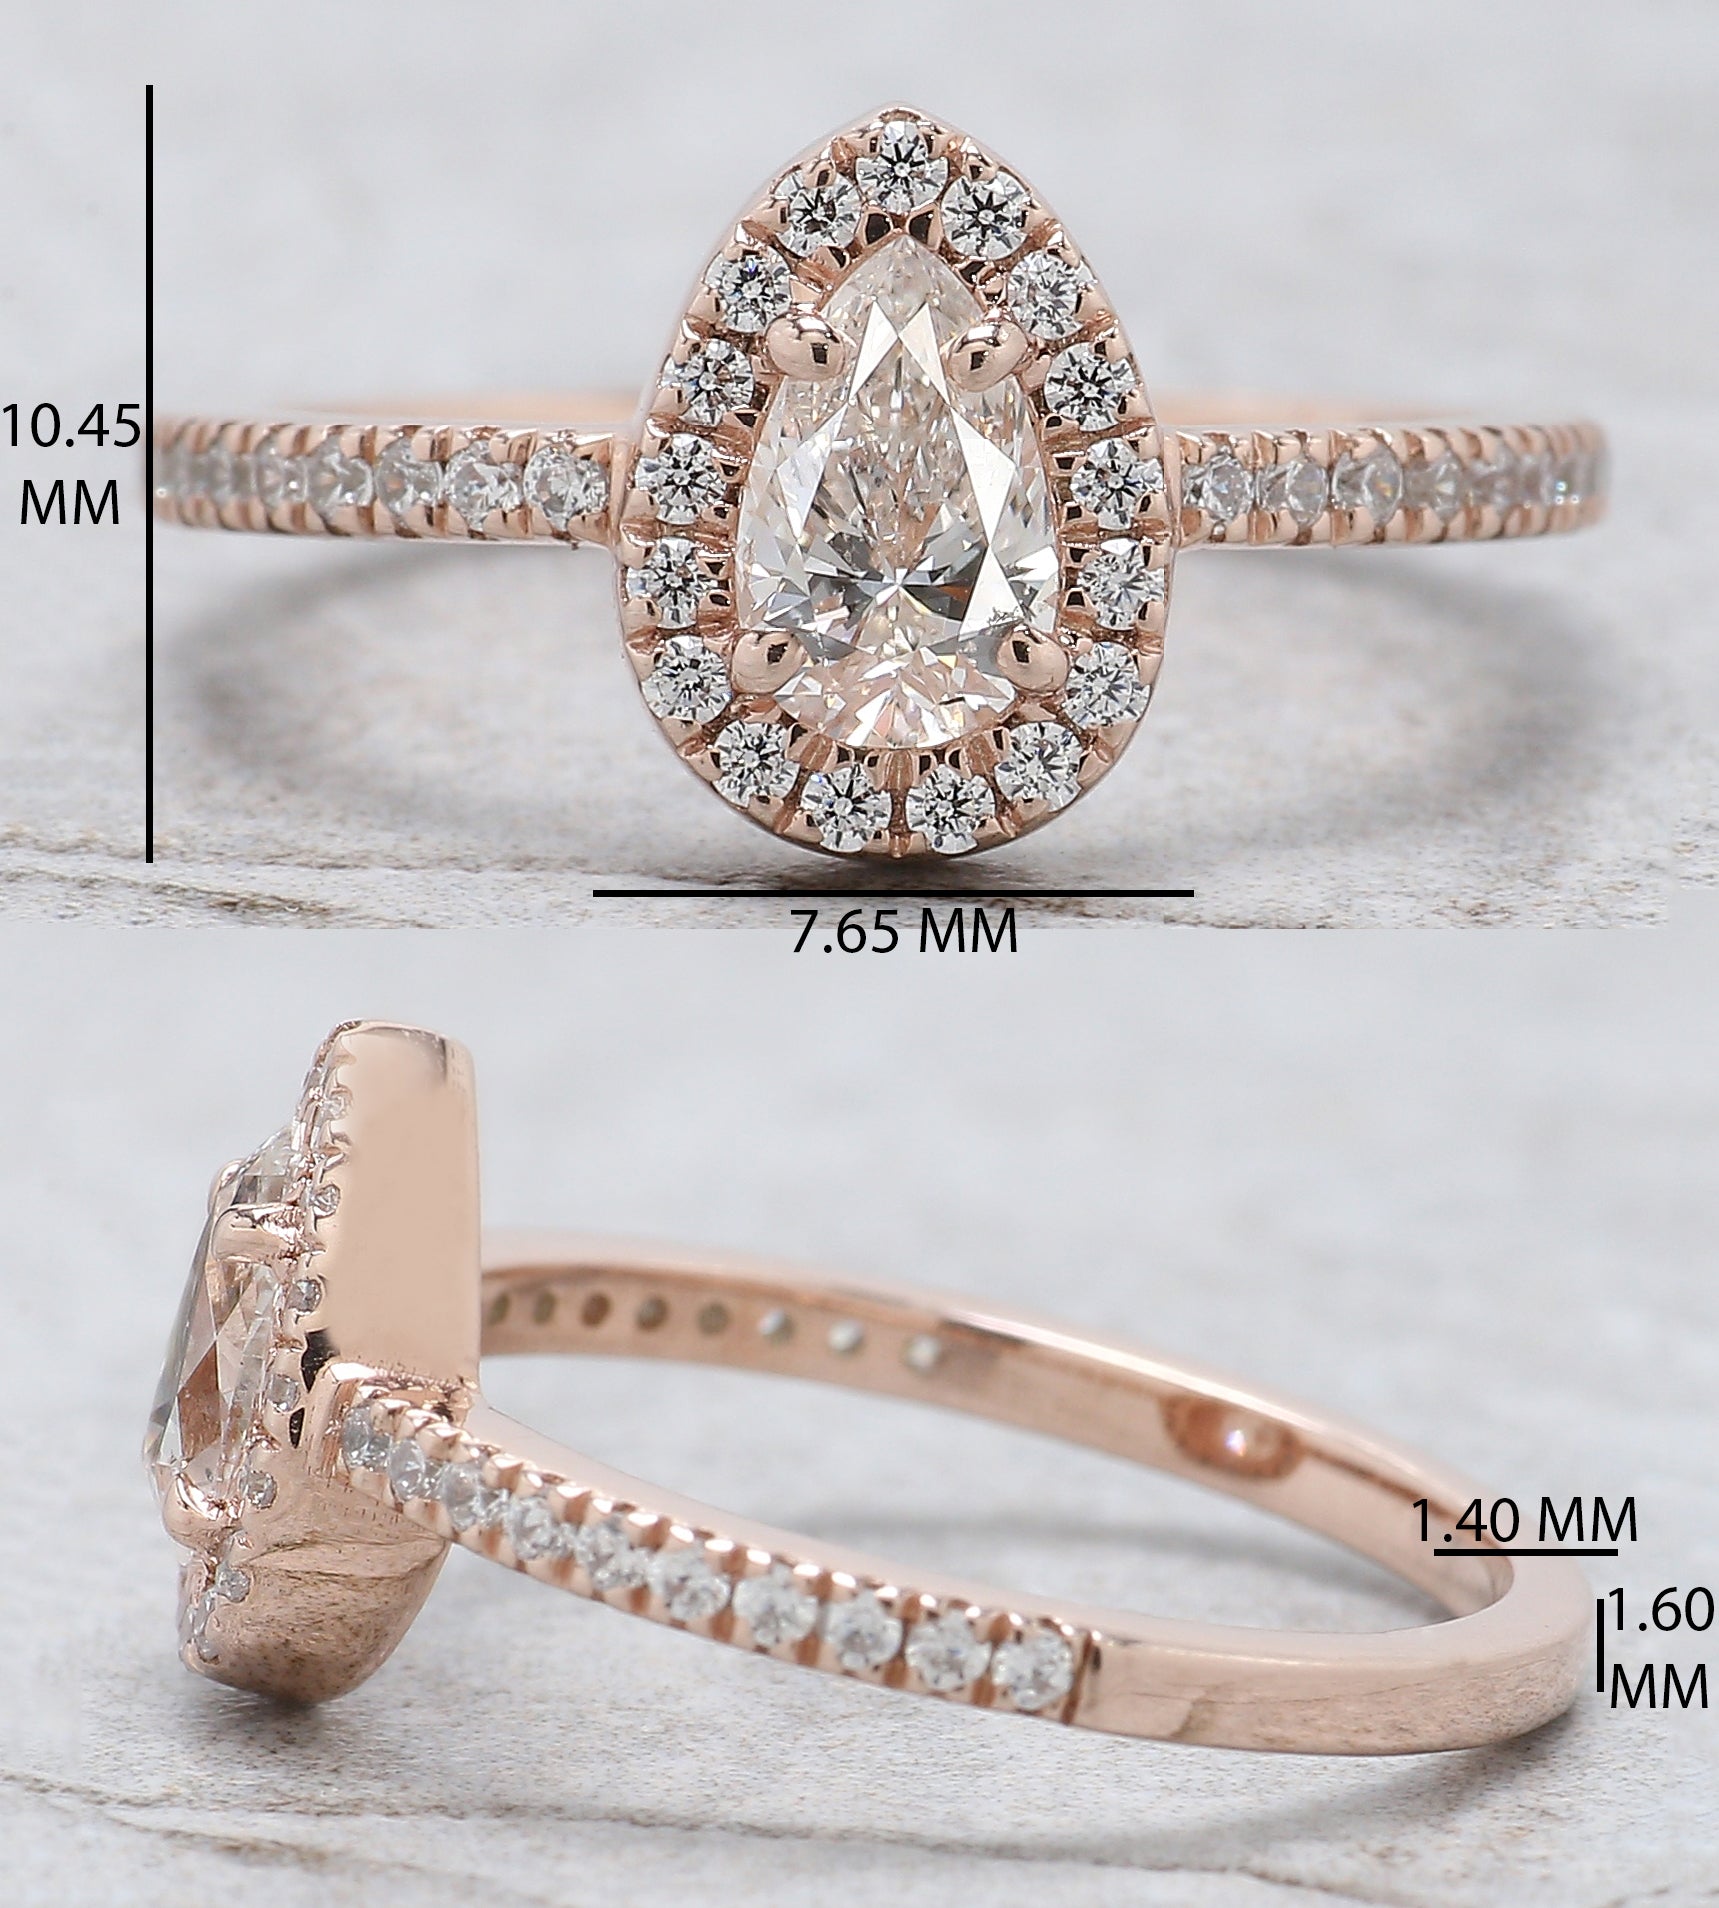 Pear Cut White Color Diamond Ring 0.51 Ct 6.85 MM Pear Diamond Ring 14K Solid Rose Gold Silver Pear Engagement Ring Gift For Her QL9755